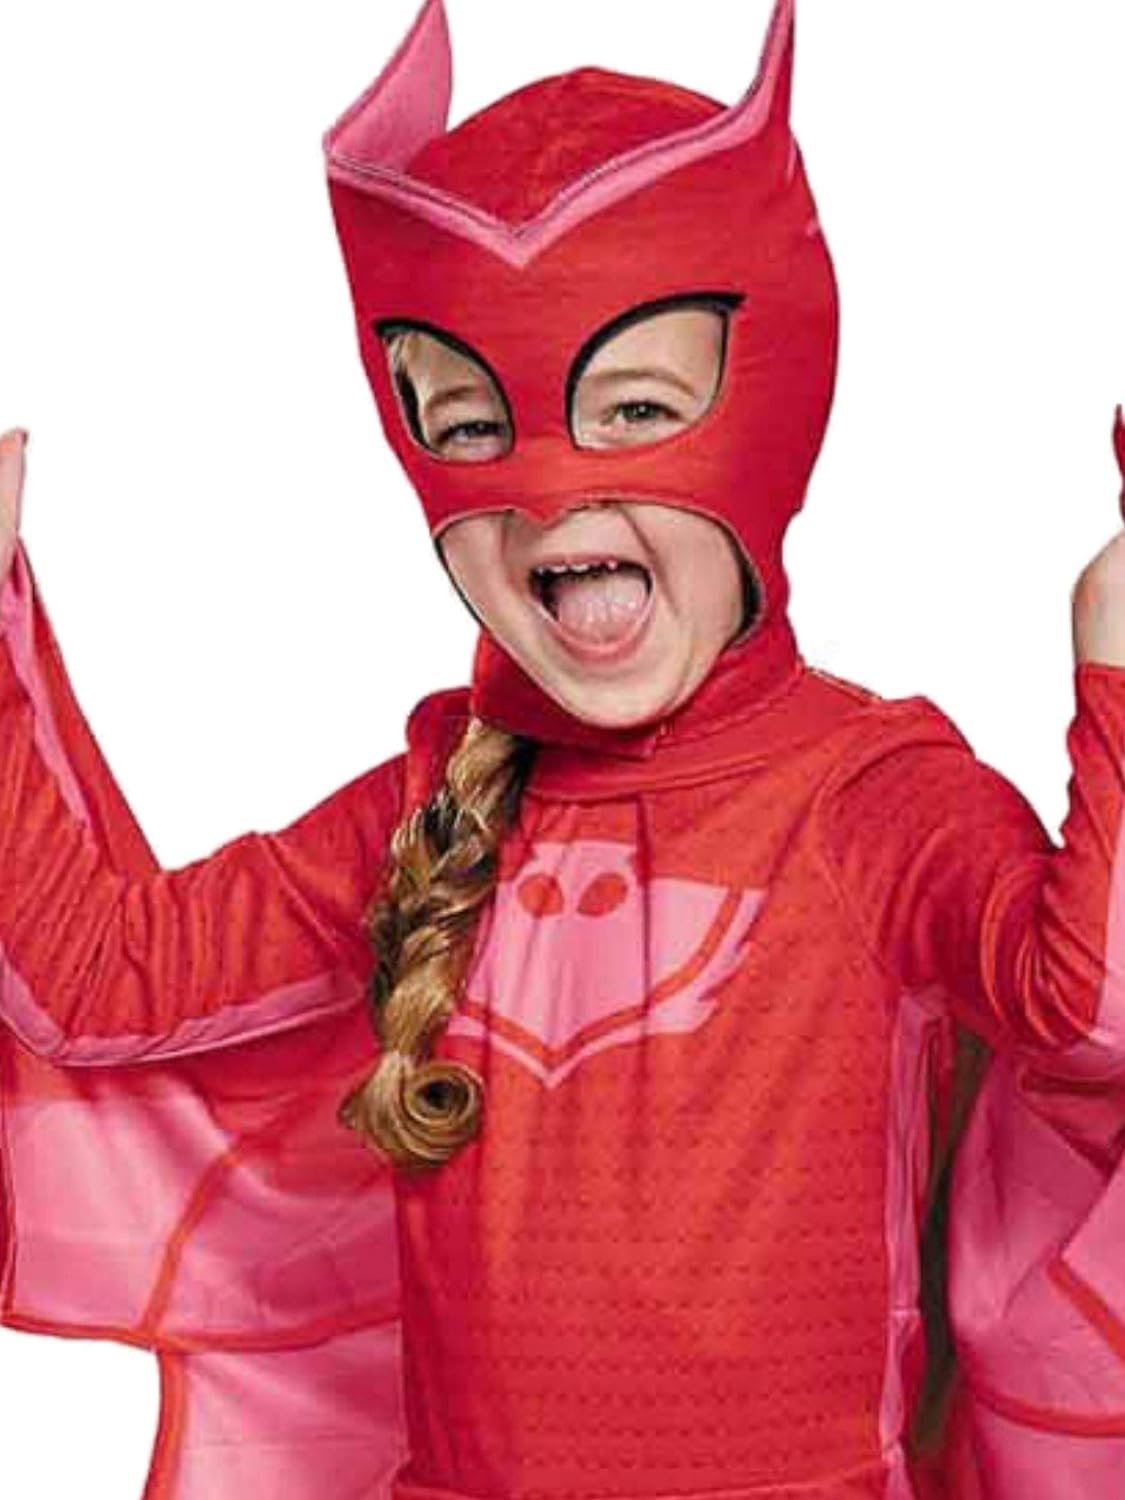 Owlette Classic Toddler PJ Masks Costume, Small/2T